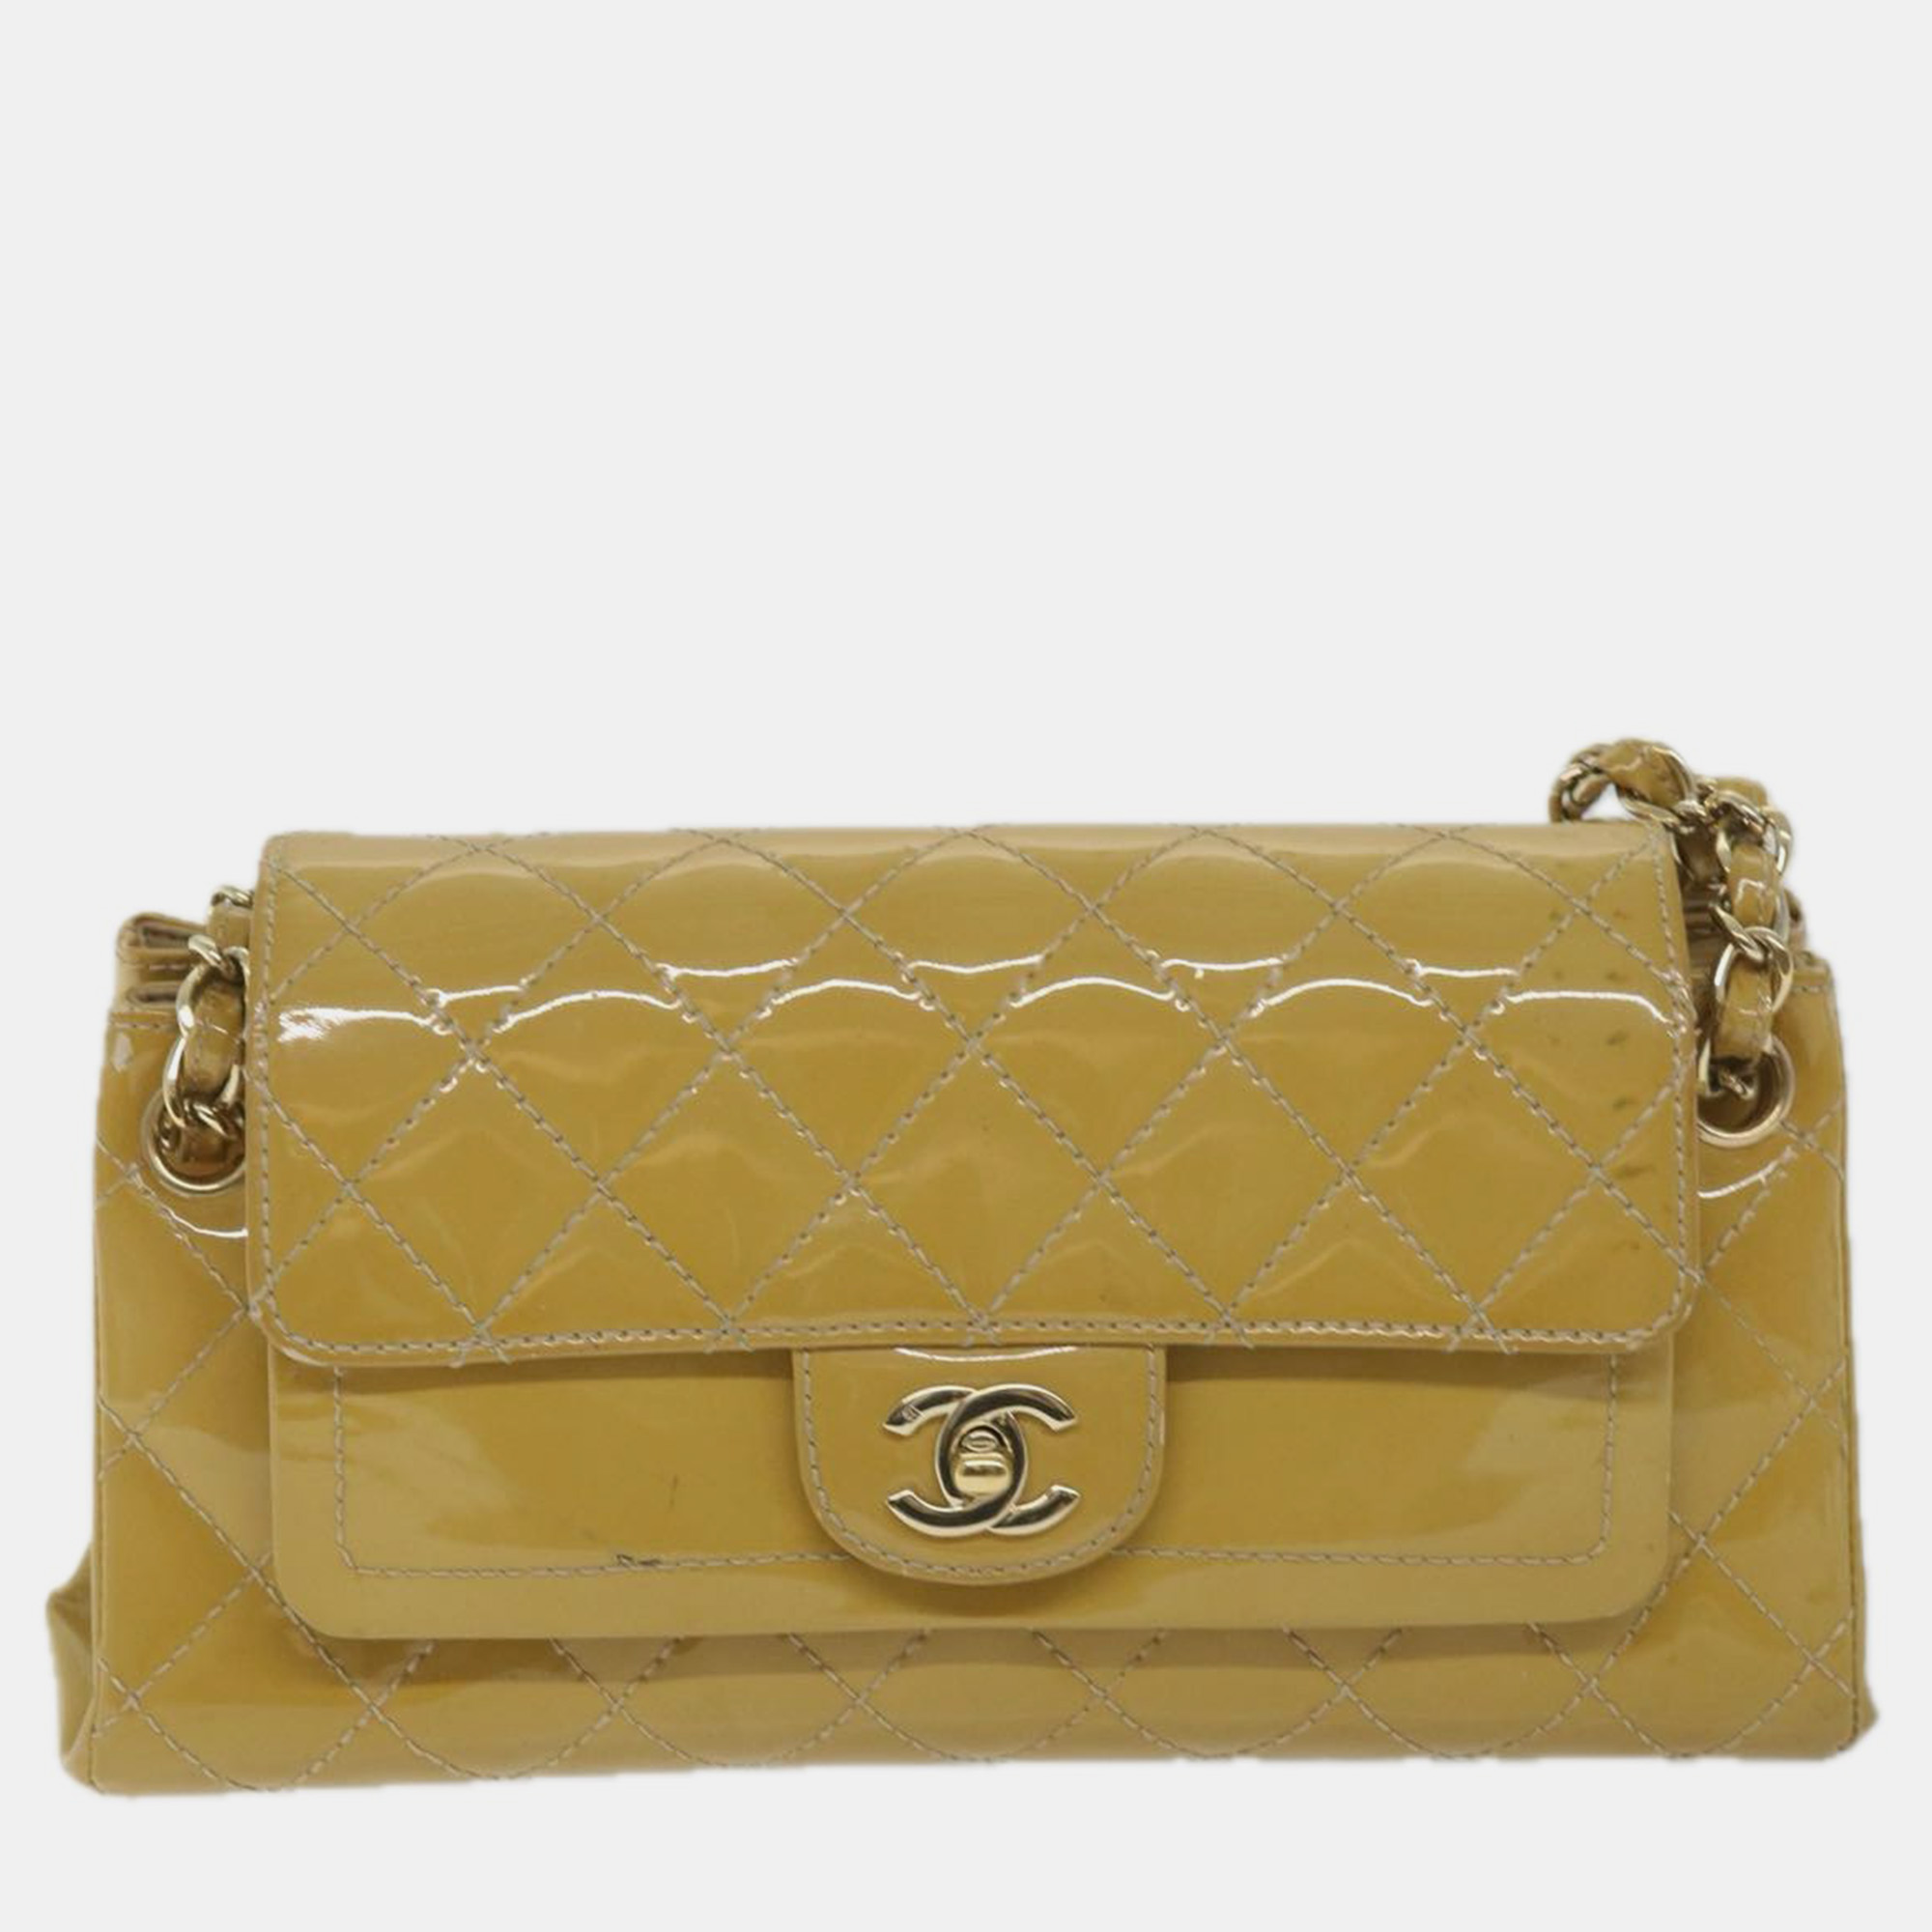 Pre-owned Chanel Yellow Patent Leather Matelasse Shoulder Bag